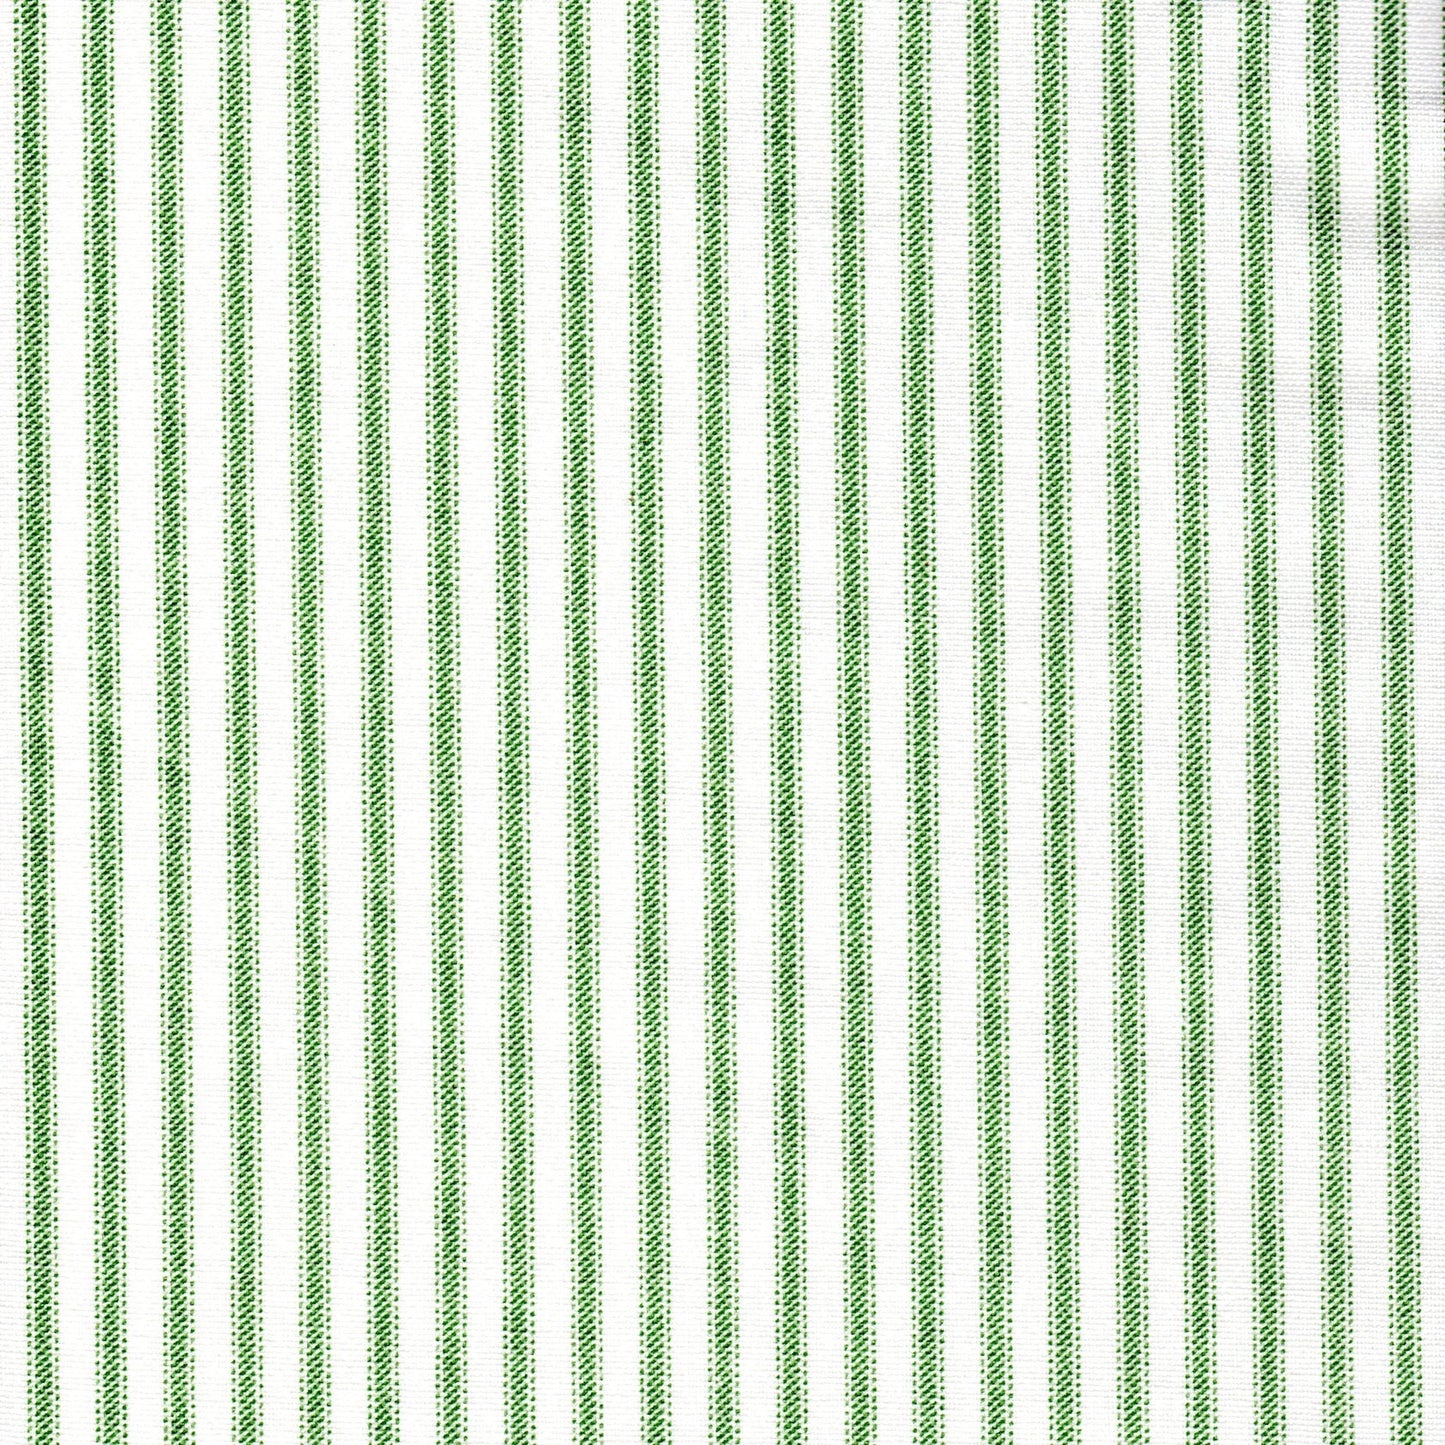 tailored tier curtains in Classic Pine Green Ticking Stripe on White